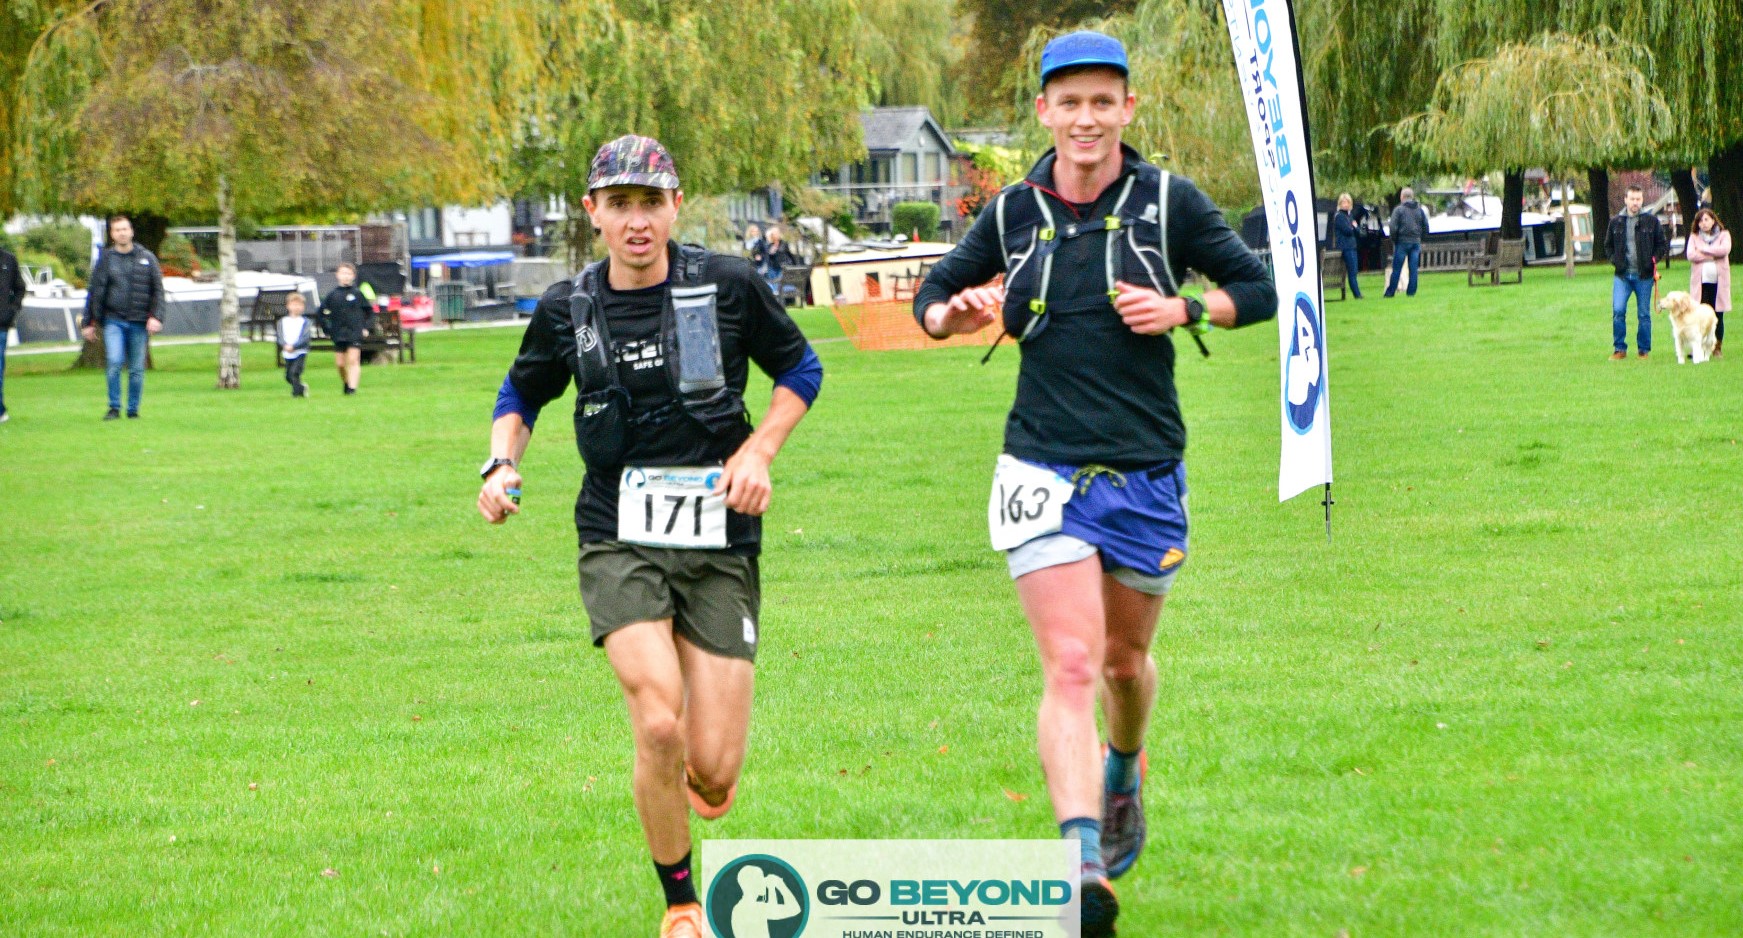 Harry Smith and Jack Searl in the Thames Trot Ultra